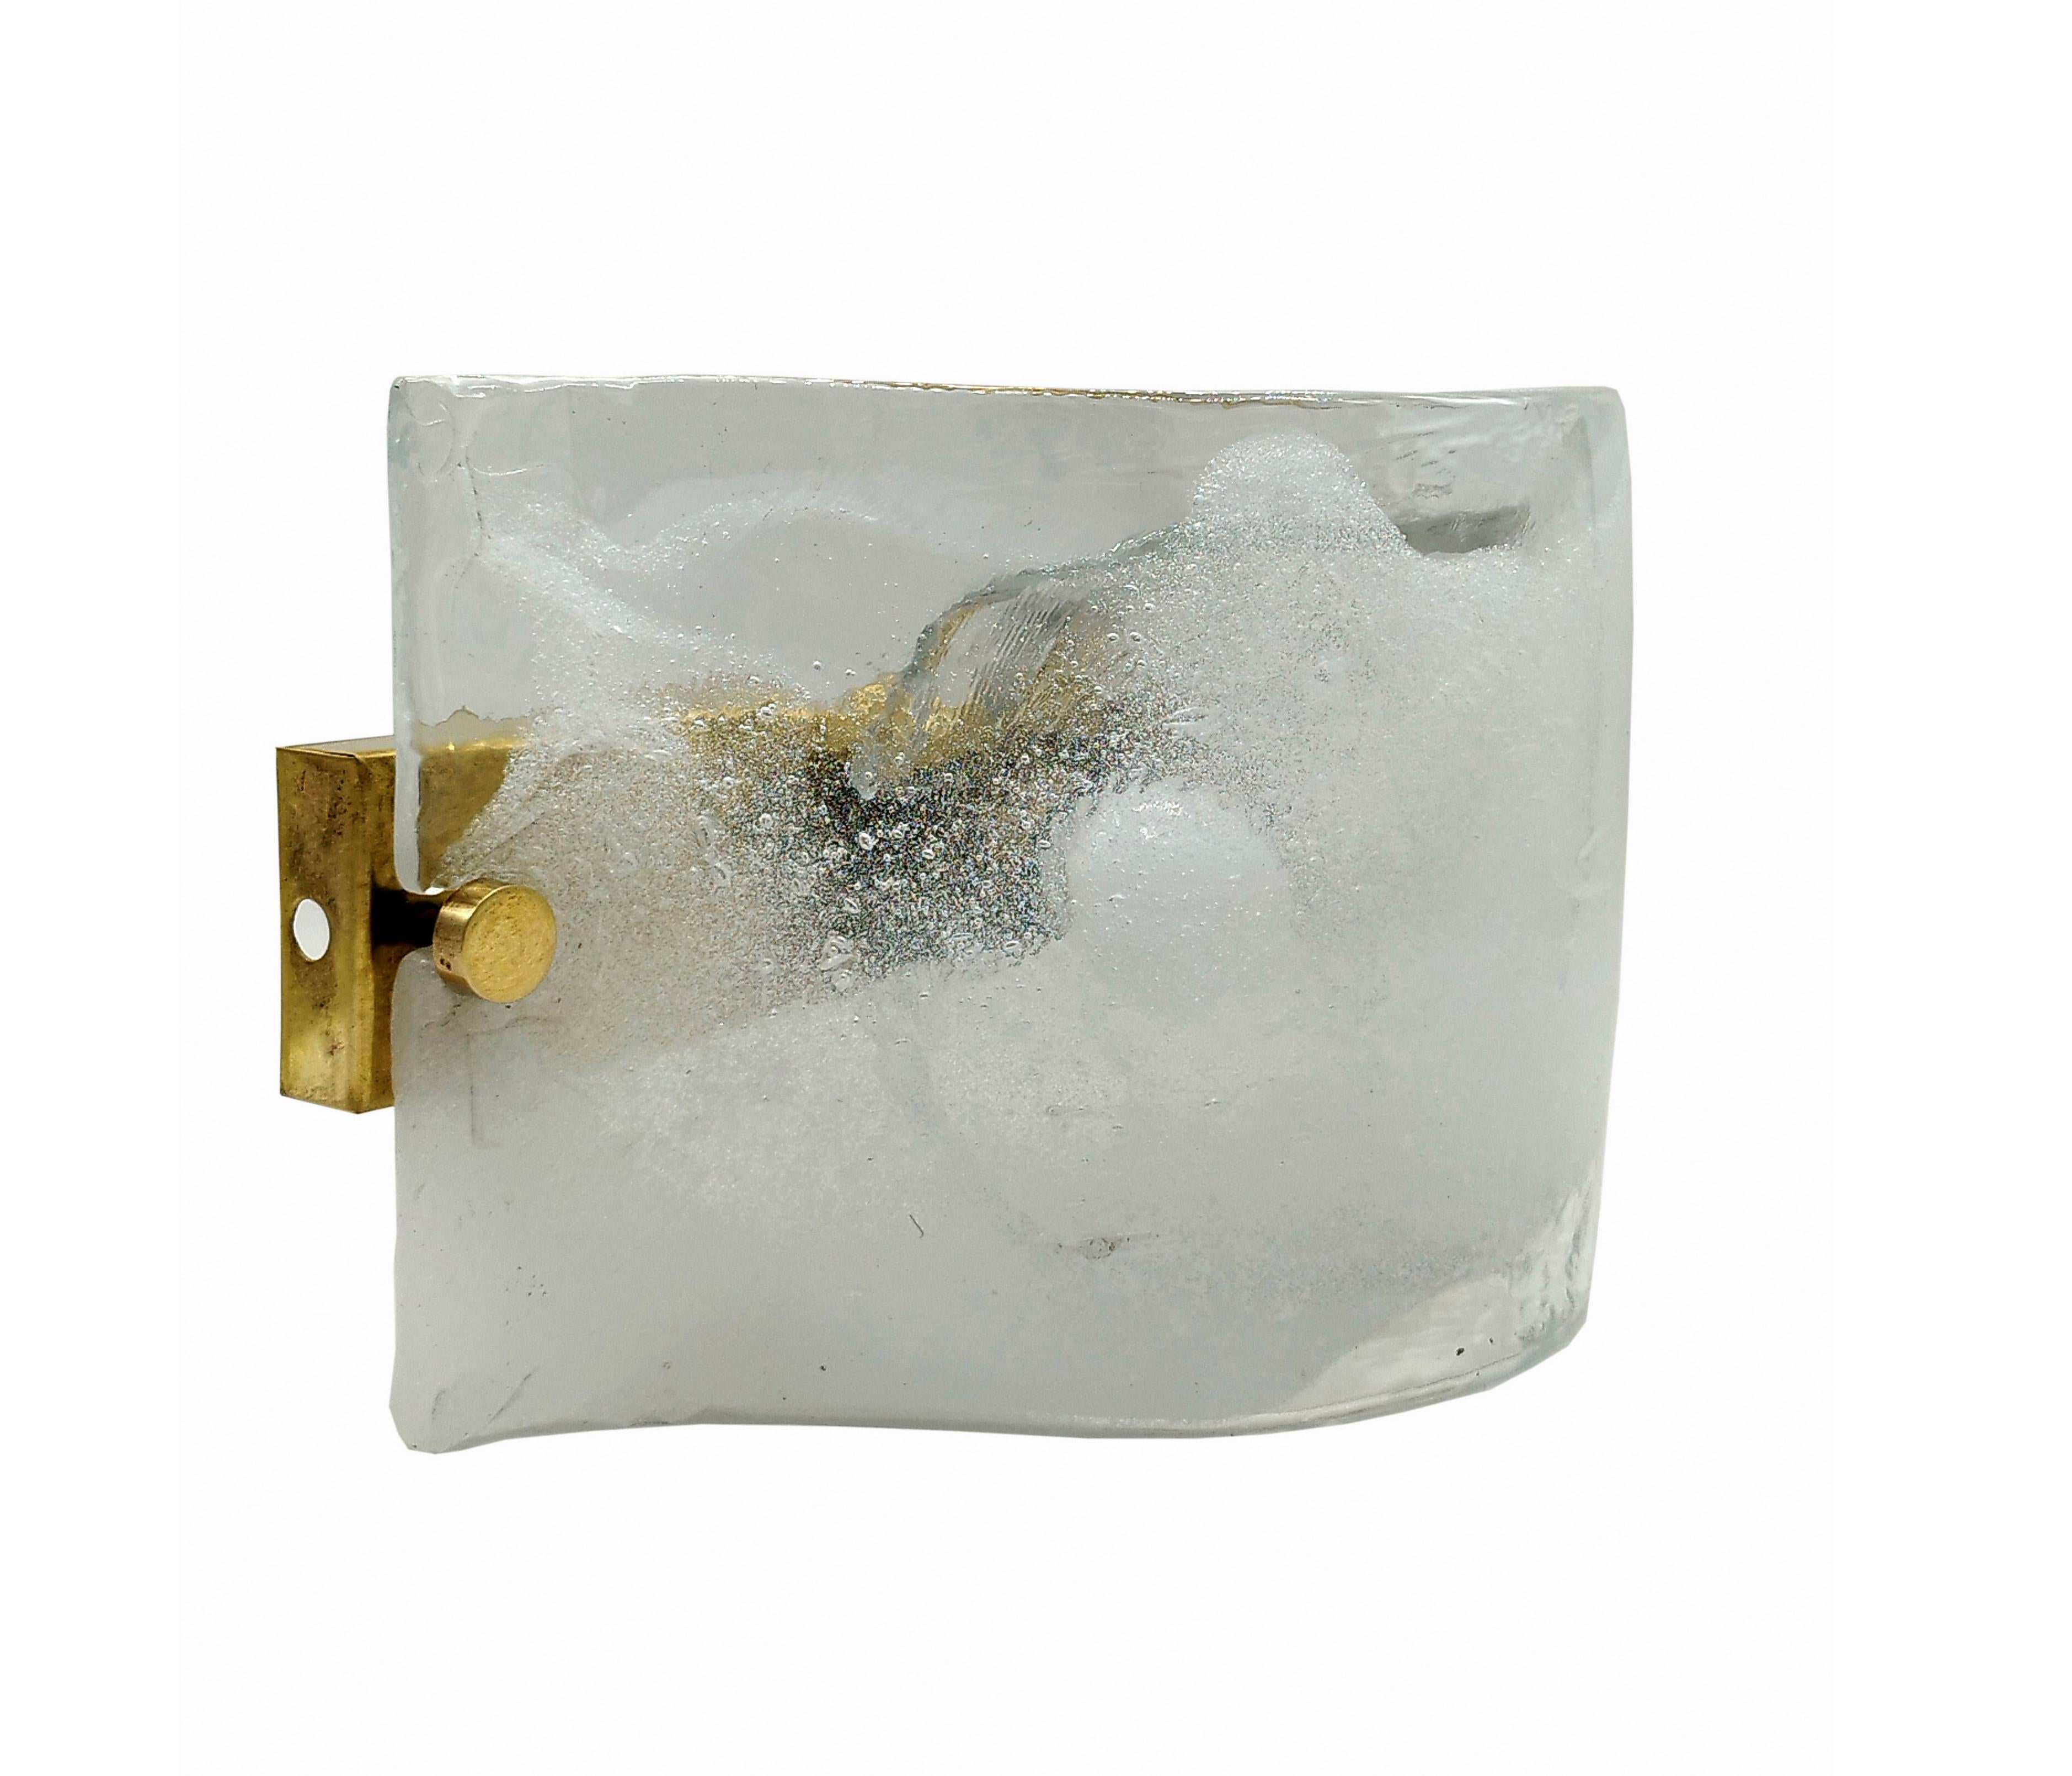 Carlo Nason for Mazzega, white hot-worked glass wall sconce on brass base, murano, Italy, late 1960s. White fused glass wall sconce on a brass back plate. The curved glass is held on the plate by two large brass screws.